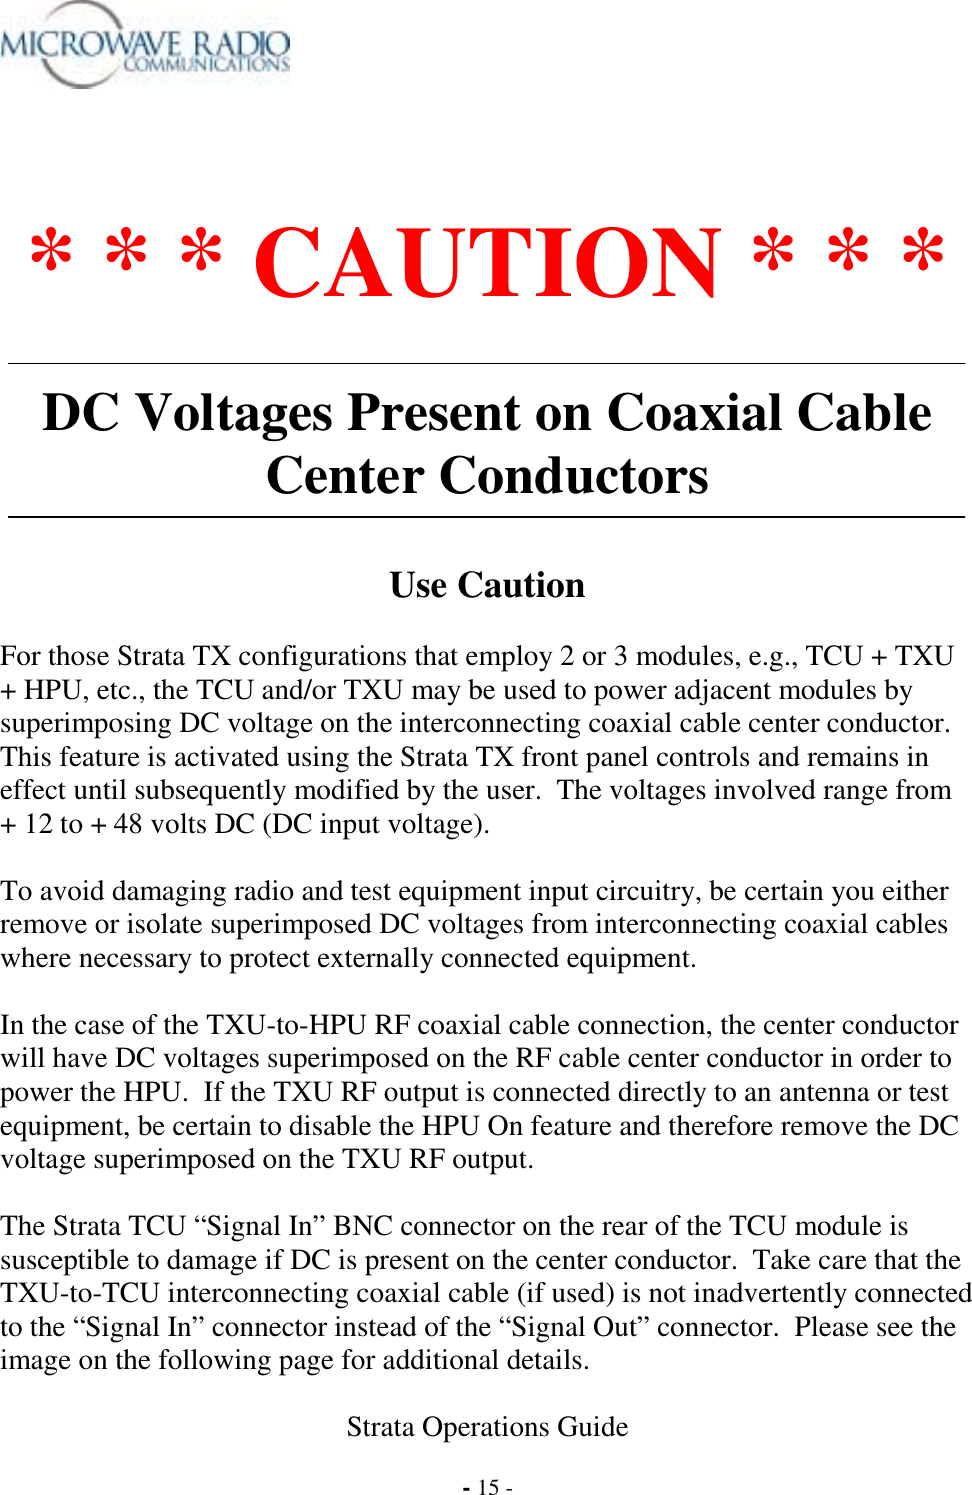  Strata Operations Guide  - 15 -  * * * CAUTION * * *  DC Voltages Present on Coaxial Cable Center Conductors   Use Caution  For those Strata TX configurations that employ 2 or 3 modules, e.g., TCU + TXU + HPU, etc., the TCU and/or TXU may be used to power adjacent modules by superimposing DC voltage on the interconnecting coaxial cable center conductor.  This feature is activated using the Strata TX front panel controls and remains in effect until subsequently modified by the user.  The voltages involved range from + 12 to + 48 volts DC (DC input voltage).  To avoid damaging radio and test equipment input circuitry, be certain you either remove or isolate superimposed DC voltages from interconnecting coaxial cables where necessary to protect externally connected equipment.  In the case of the TXU-to-HPU RF coaxial cable connection, the center conductor will have DC voltages superimposed on the RF cable center conductor in order to power the HPU.  If the TXU RF output is connected directly to an antenna or test equipment, be certain to disable the HPU On feature and therefore remove the DC voltage superimposed on the TXU RF output.  The Strata TCU “Signal In” BNC connector on the rear of the TCU module is susceptible to damage if DC is present on the center conductor.  Take care that the TXU-to-TCU interconnecting coaxial cable (if used) is not inadvertently connected to the “Signal In” connector instead of the “Signal Out” connector.  Please see the image on the following page for additional details. 